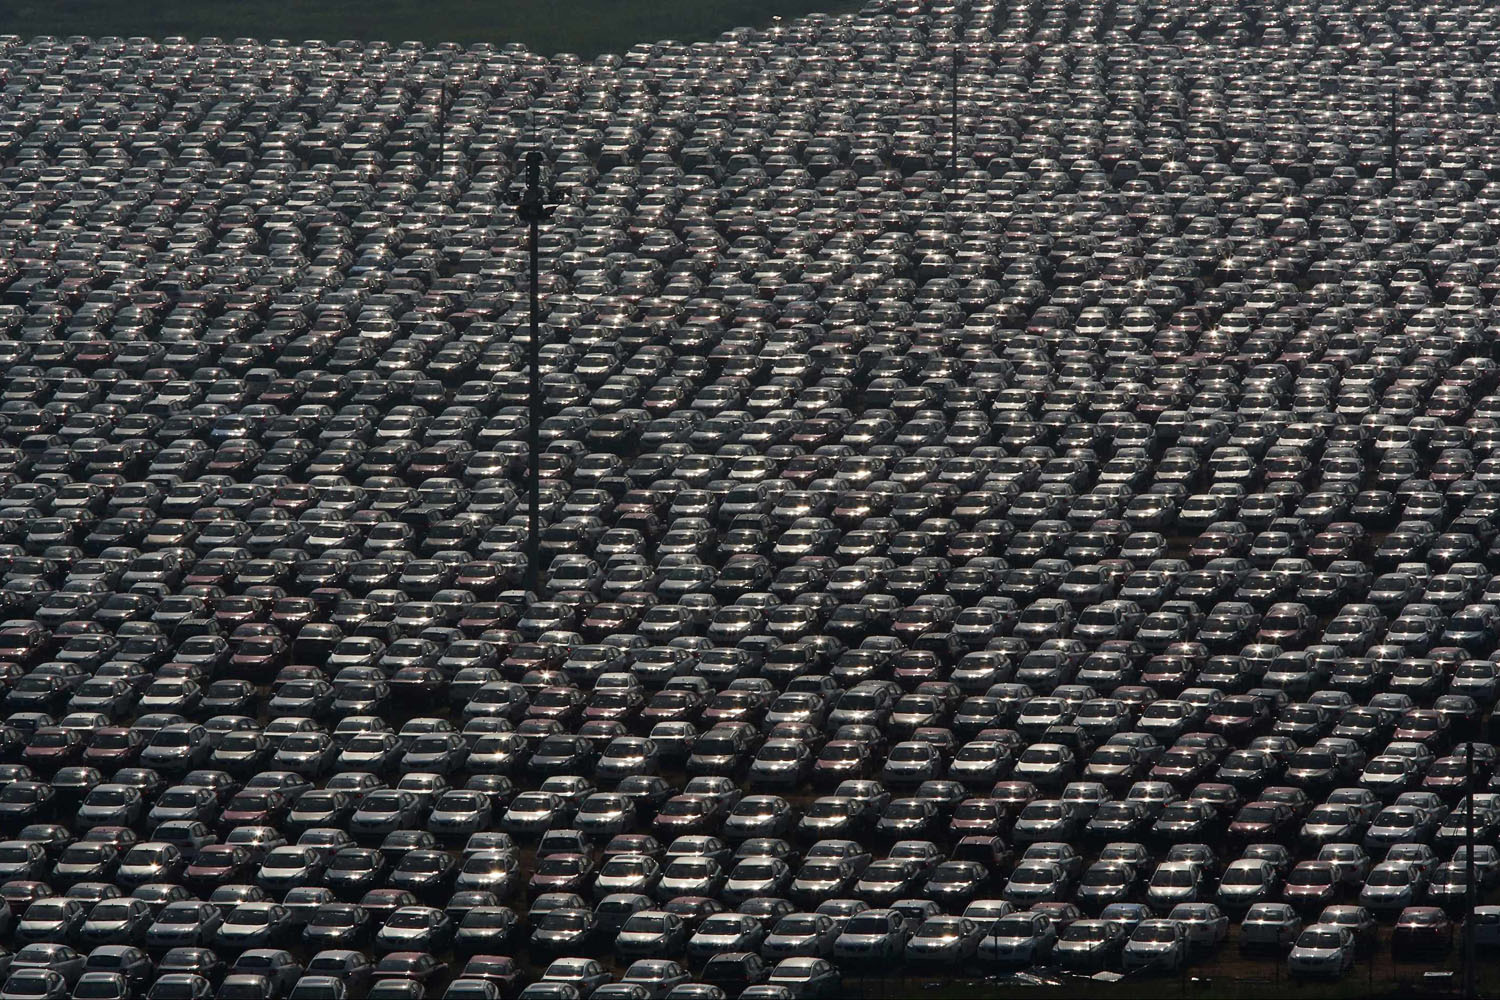 New vehicles park at a Chinese automobile factory in Shenyang